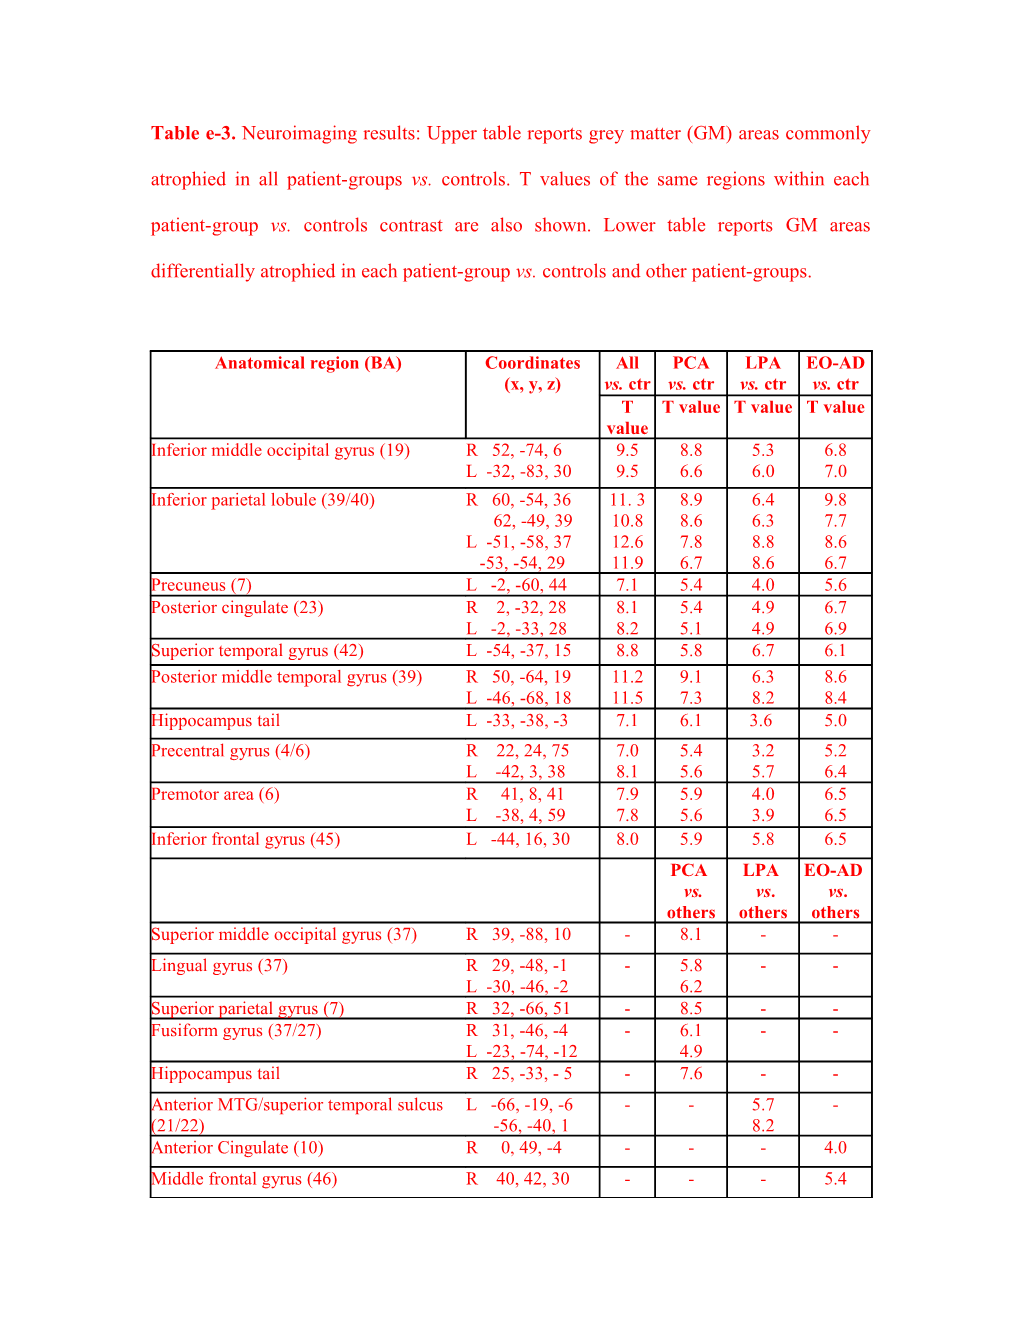 Table E-3. Neuroimaging Results: Upper Table Reports Grey Matter (GM) Areas Commonly Atrophied